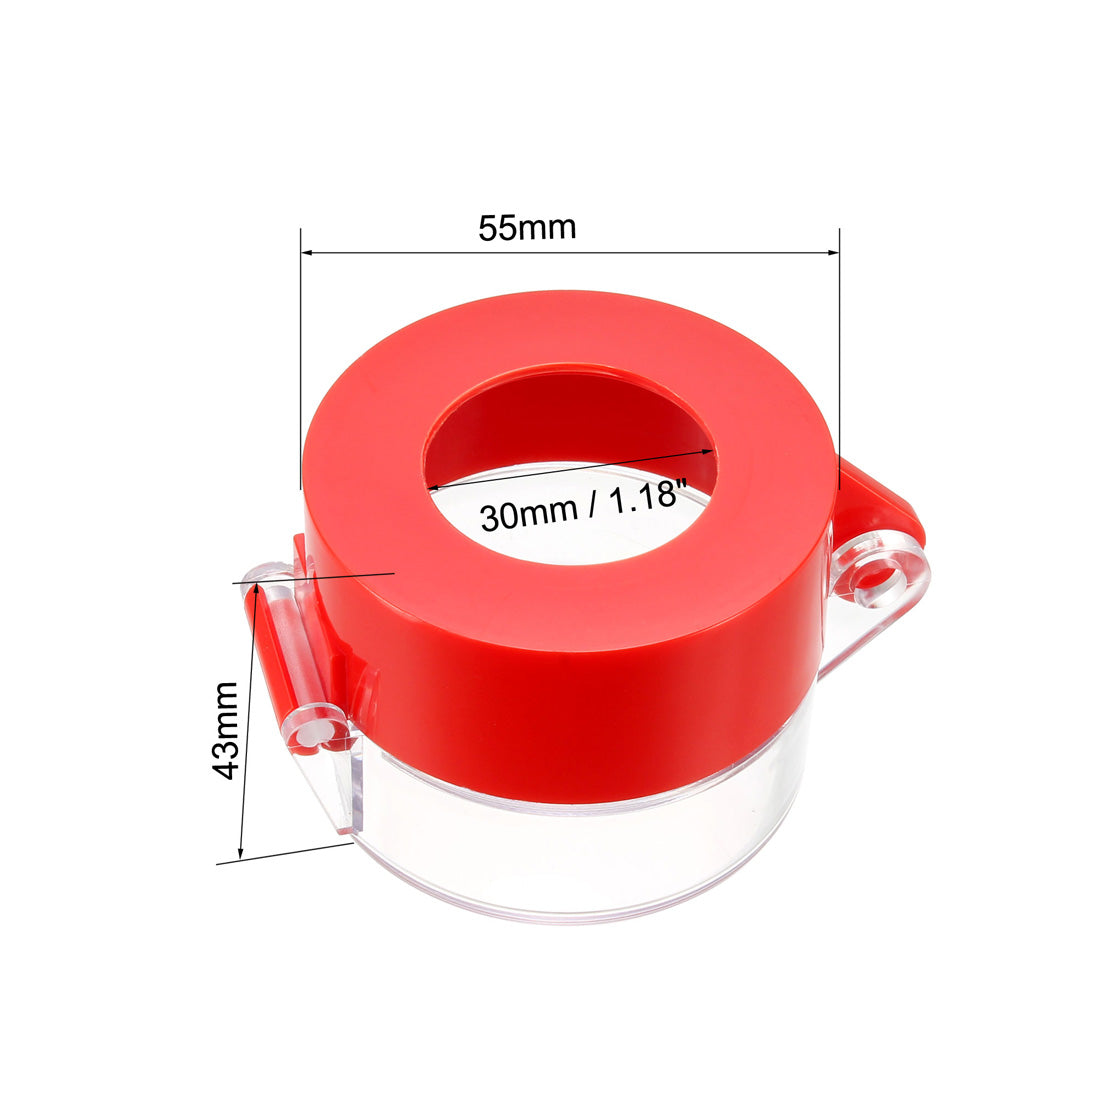 Uxcell Uxcell 2pcs Red Plastic Switch Cover Protector for 30mm Diameter Push Button Switch 55*43